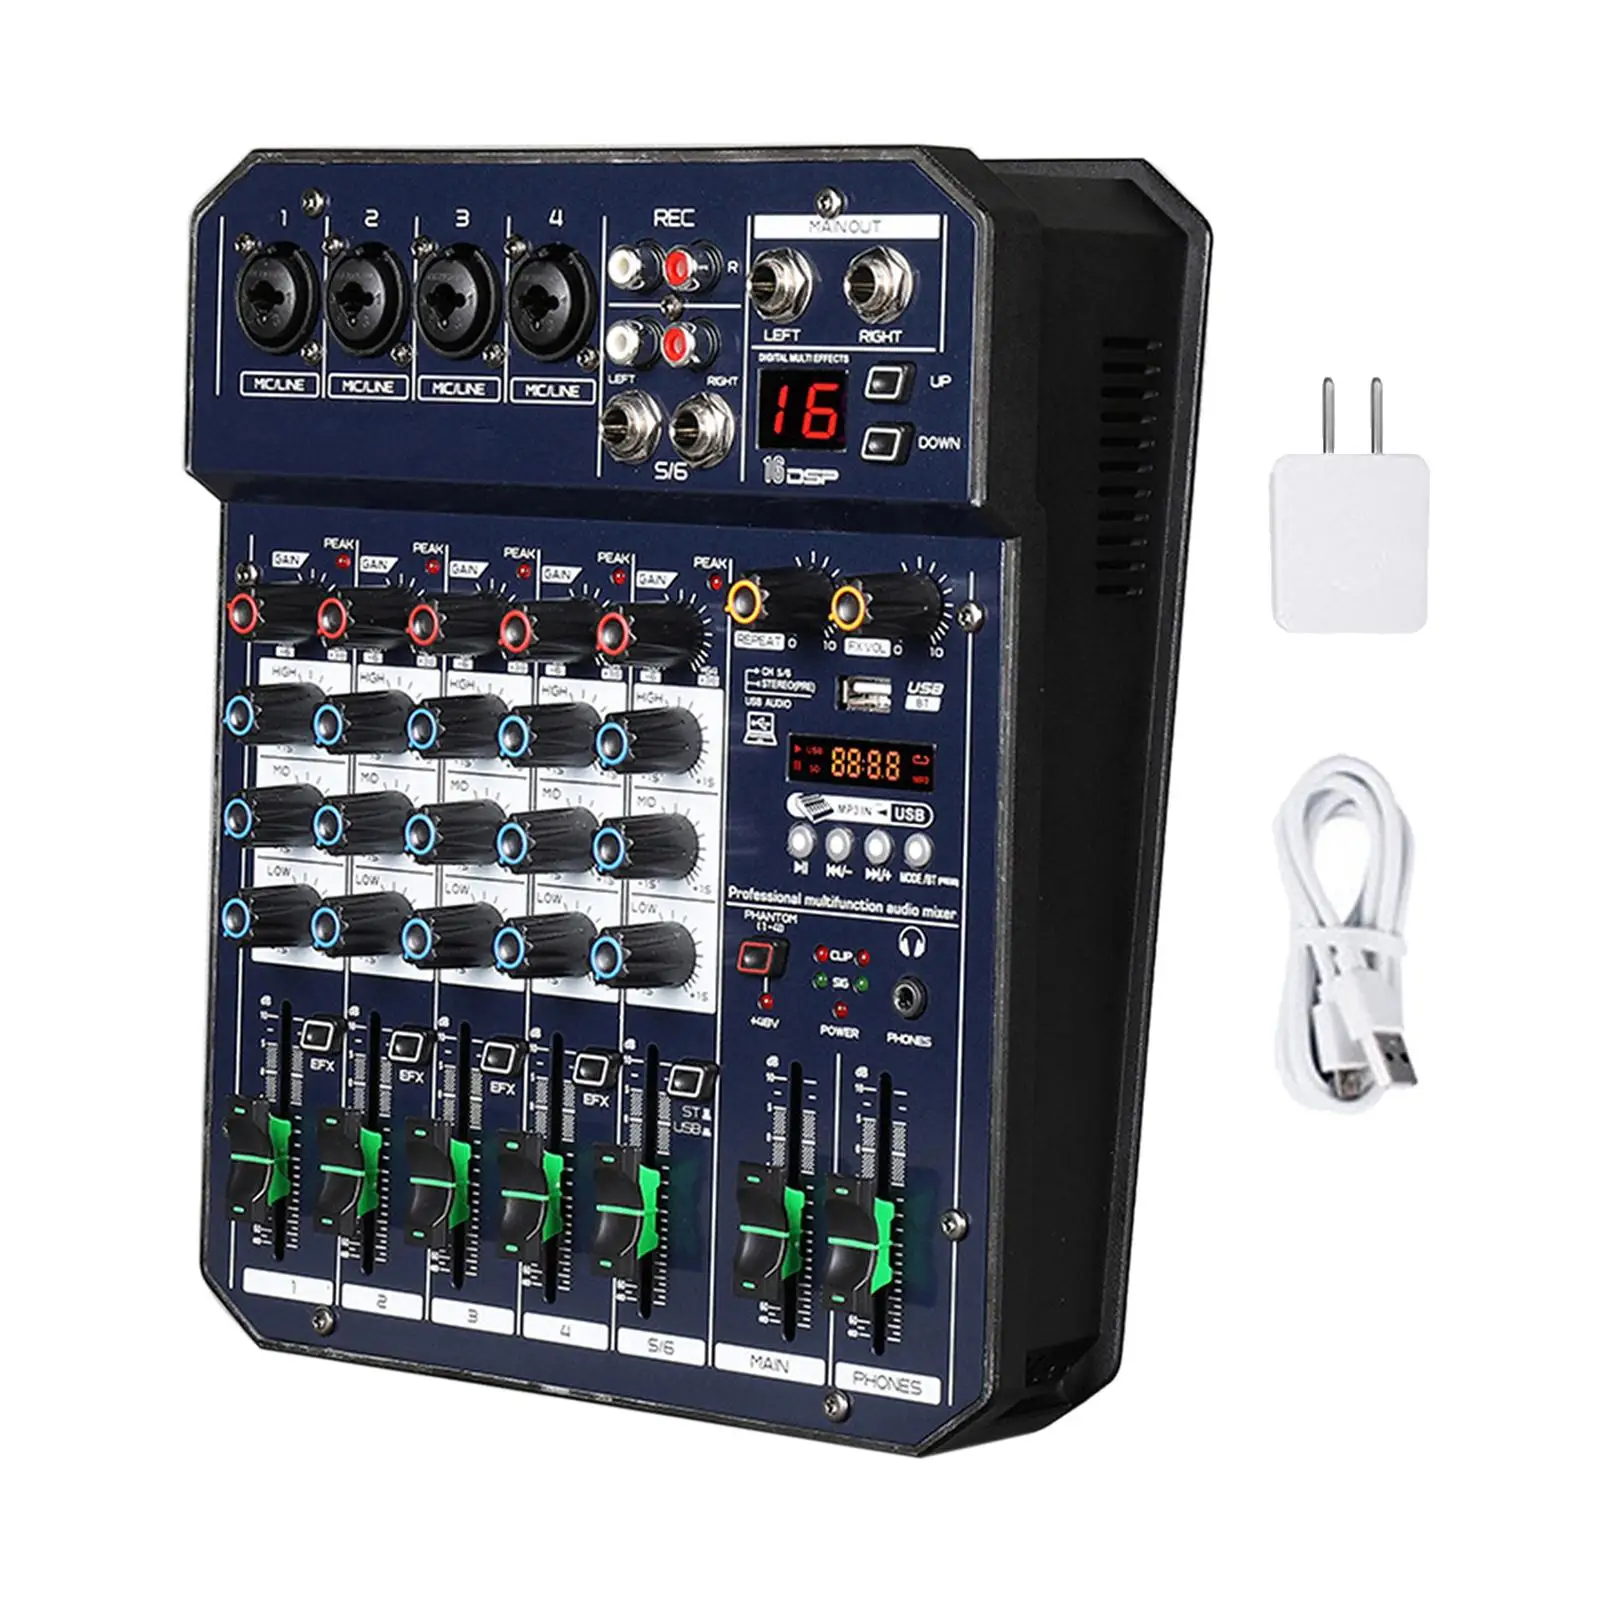 6 Channel Audio Mixer Portable Effects Mixer for studio Entertainment DJ Podcasting